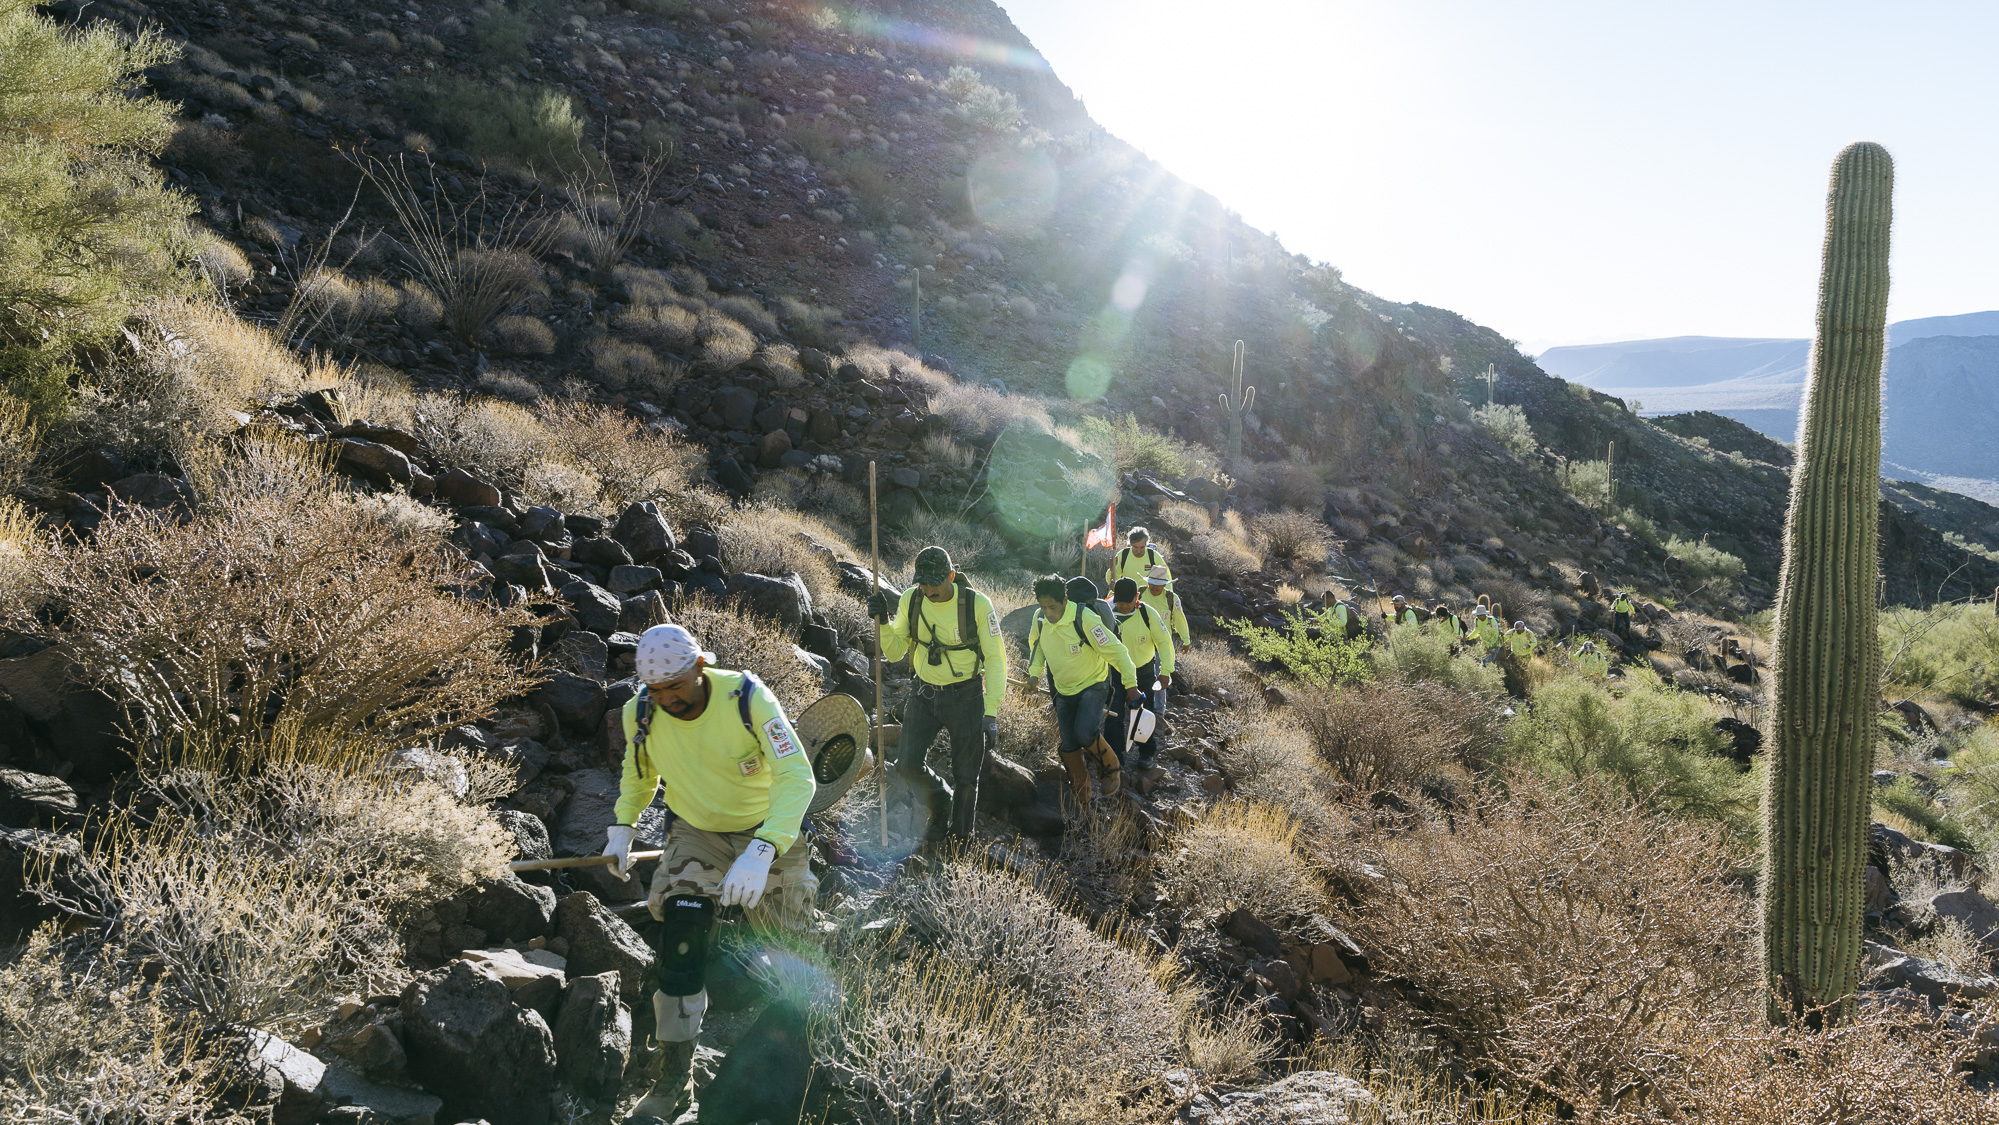  IMAGE CAPTION:  Members of Aguilas Del Desierto crest a hill in the Cabeza Prieta National Wildlife Refuge outside of Ajo, Arizona. For migrants crossing into the United States through this Sonoran Desert route the journey often takes 7-10 days with